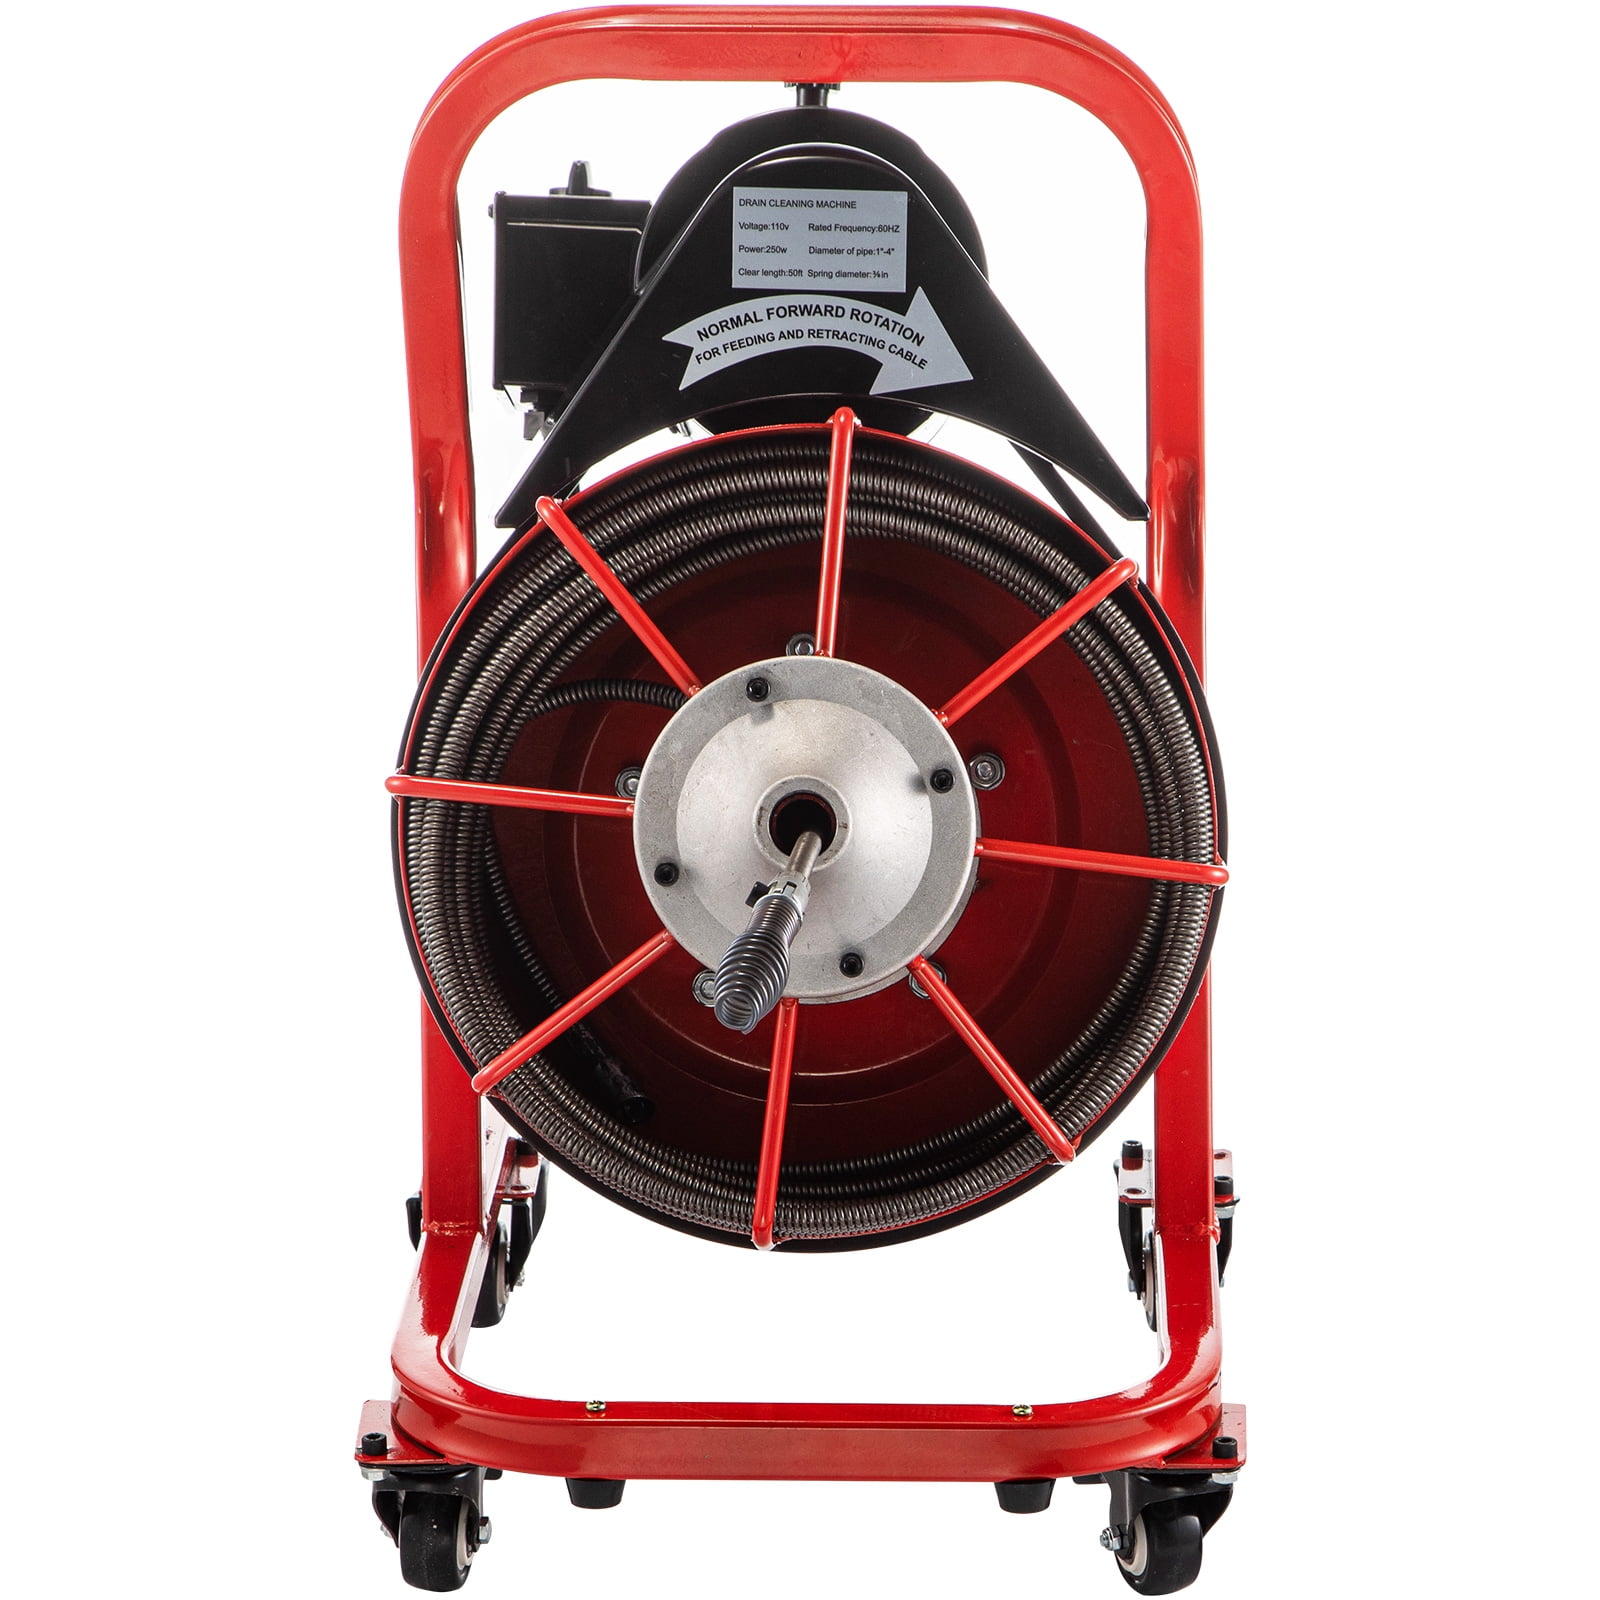 Vevorbrand Drain Cleaning Machine 50ft x 3/8 in Drain Cleaner Machines 250W Electric Drain Auger for 1 to 4 Pipes Electric Drain Snake Sewer Snake